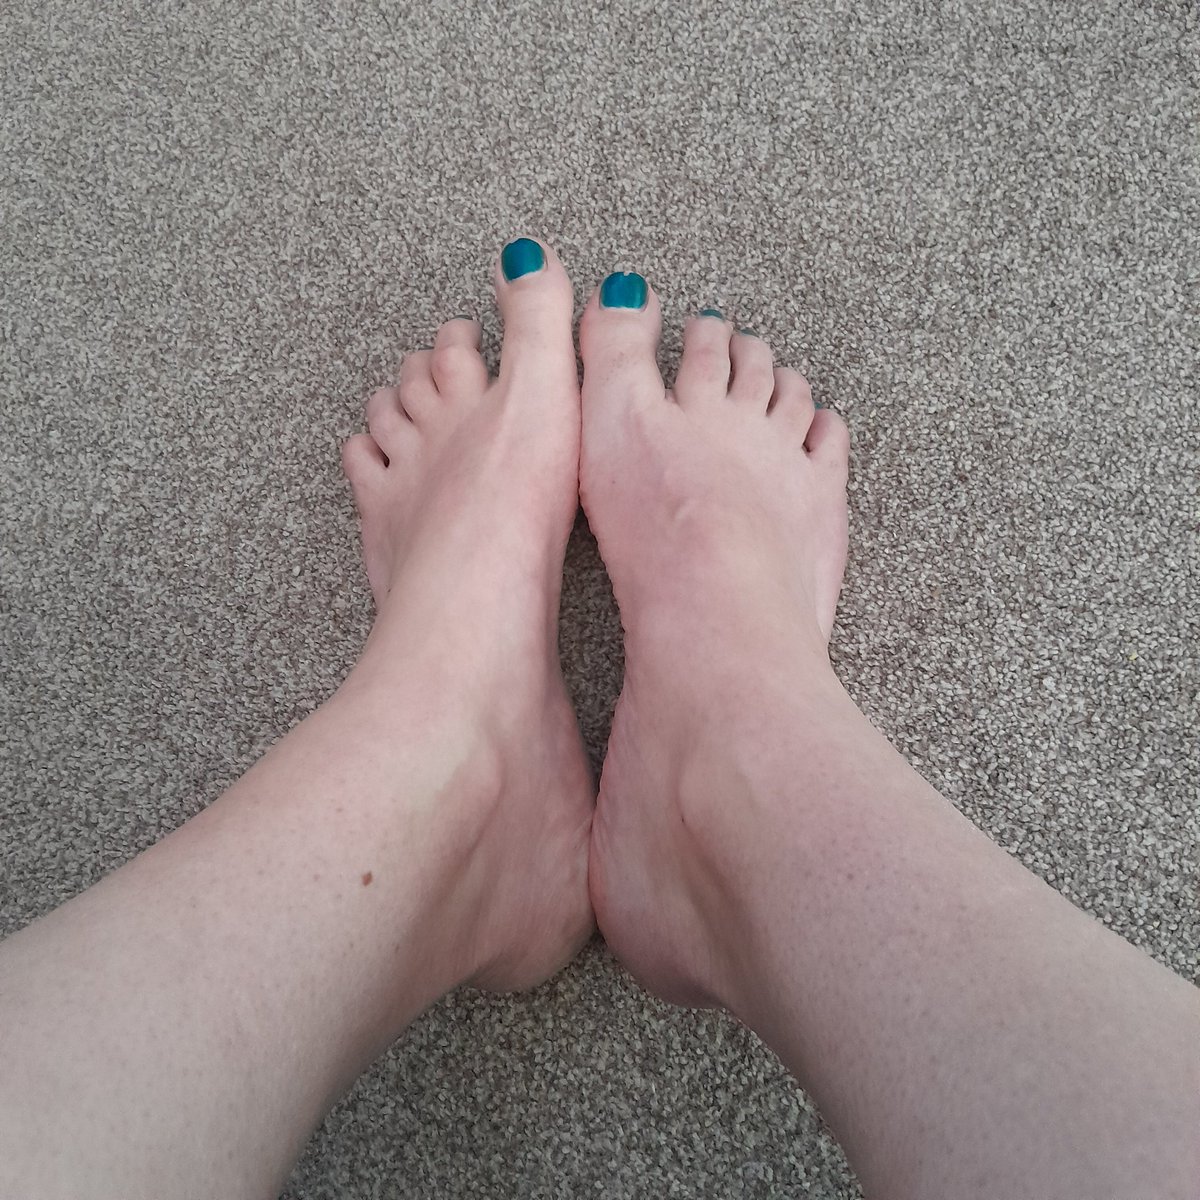 Just gotten home after a long day and evening out and my feet are so hot, anyone want to help me cool them down?
#sexyfeet #bigfeet #feetfinder #footworship #footfetısh #footslave #feetworshi̇p #feet #foot #toes #sexytoes #sellingsoles #sellingfeet #sellingfeetpics #feetcontent